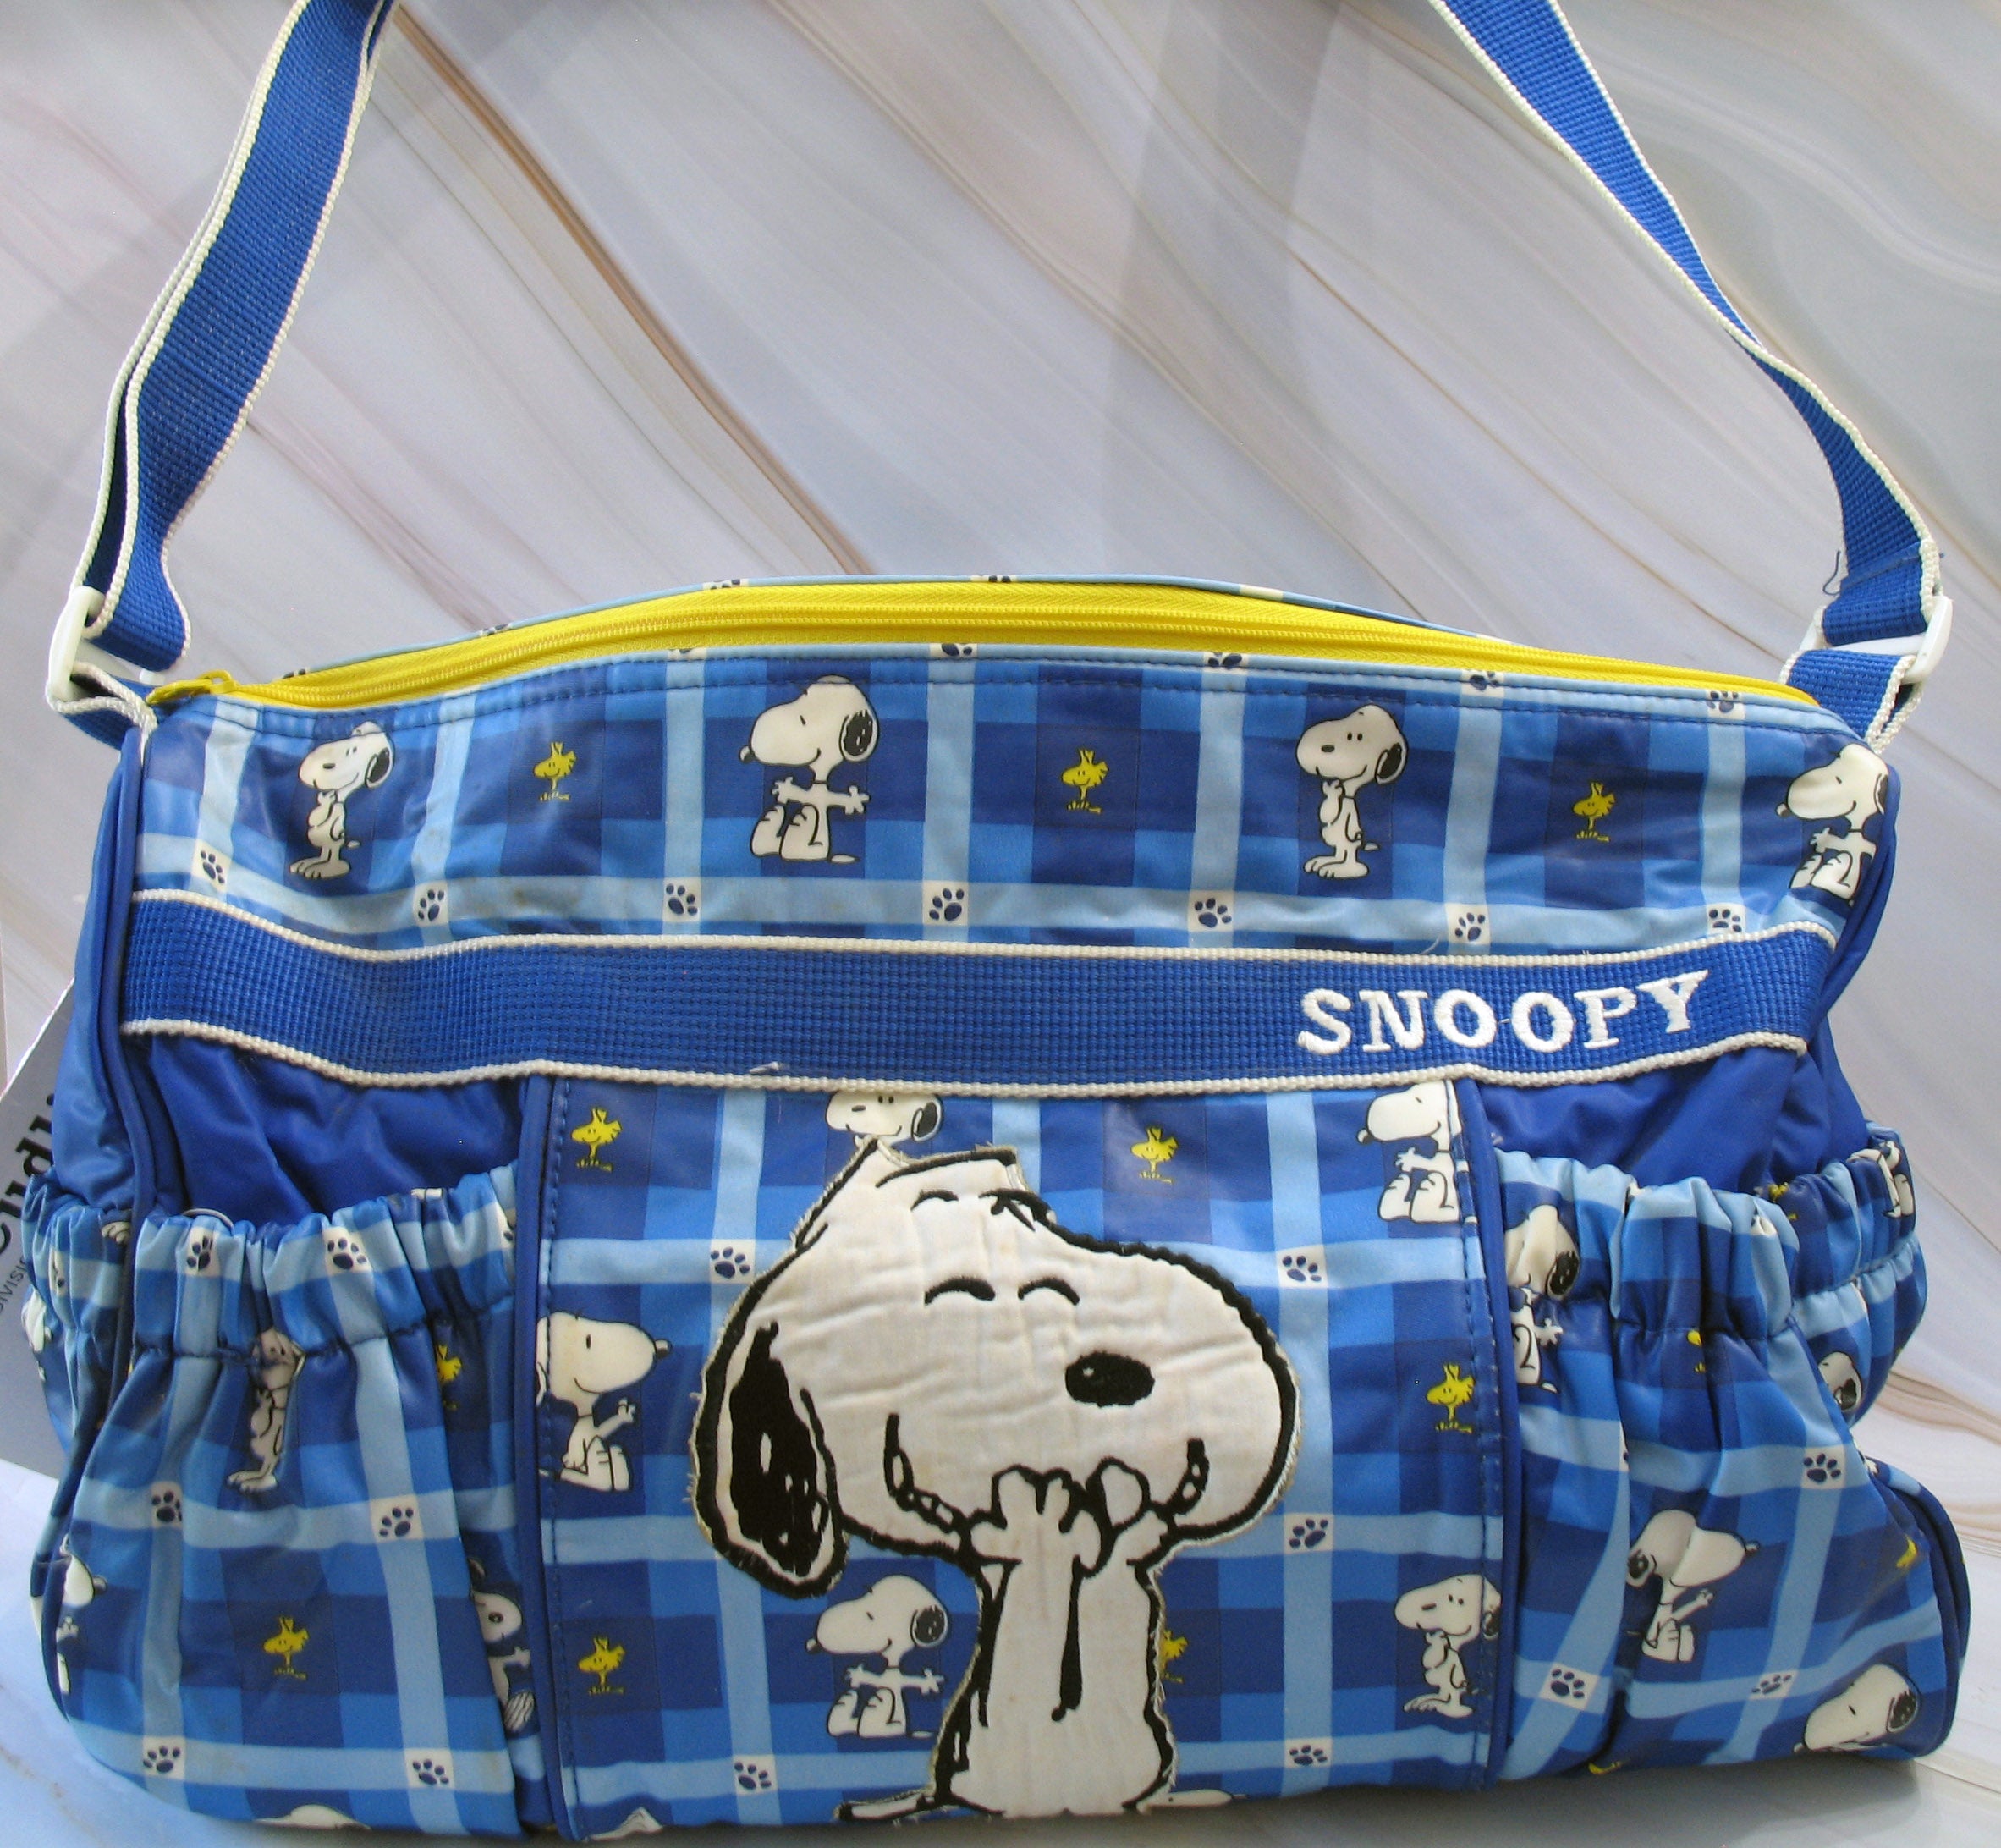 Snoopy Large Insulated Diaper Bag With Changing Pad and Wet Diaper